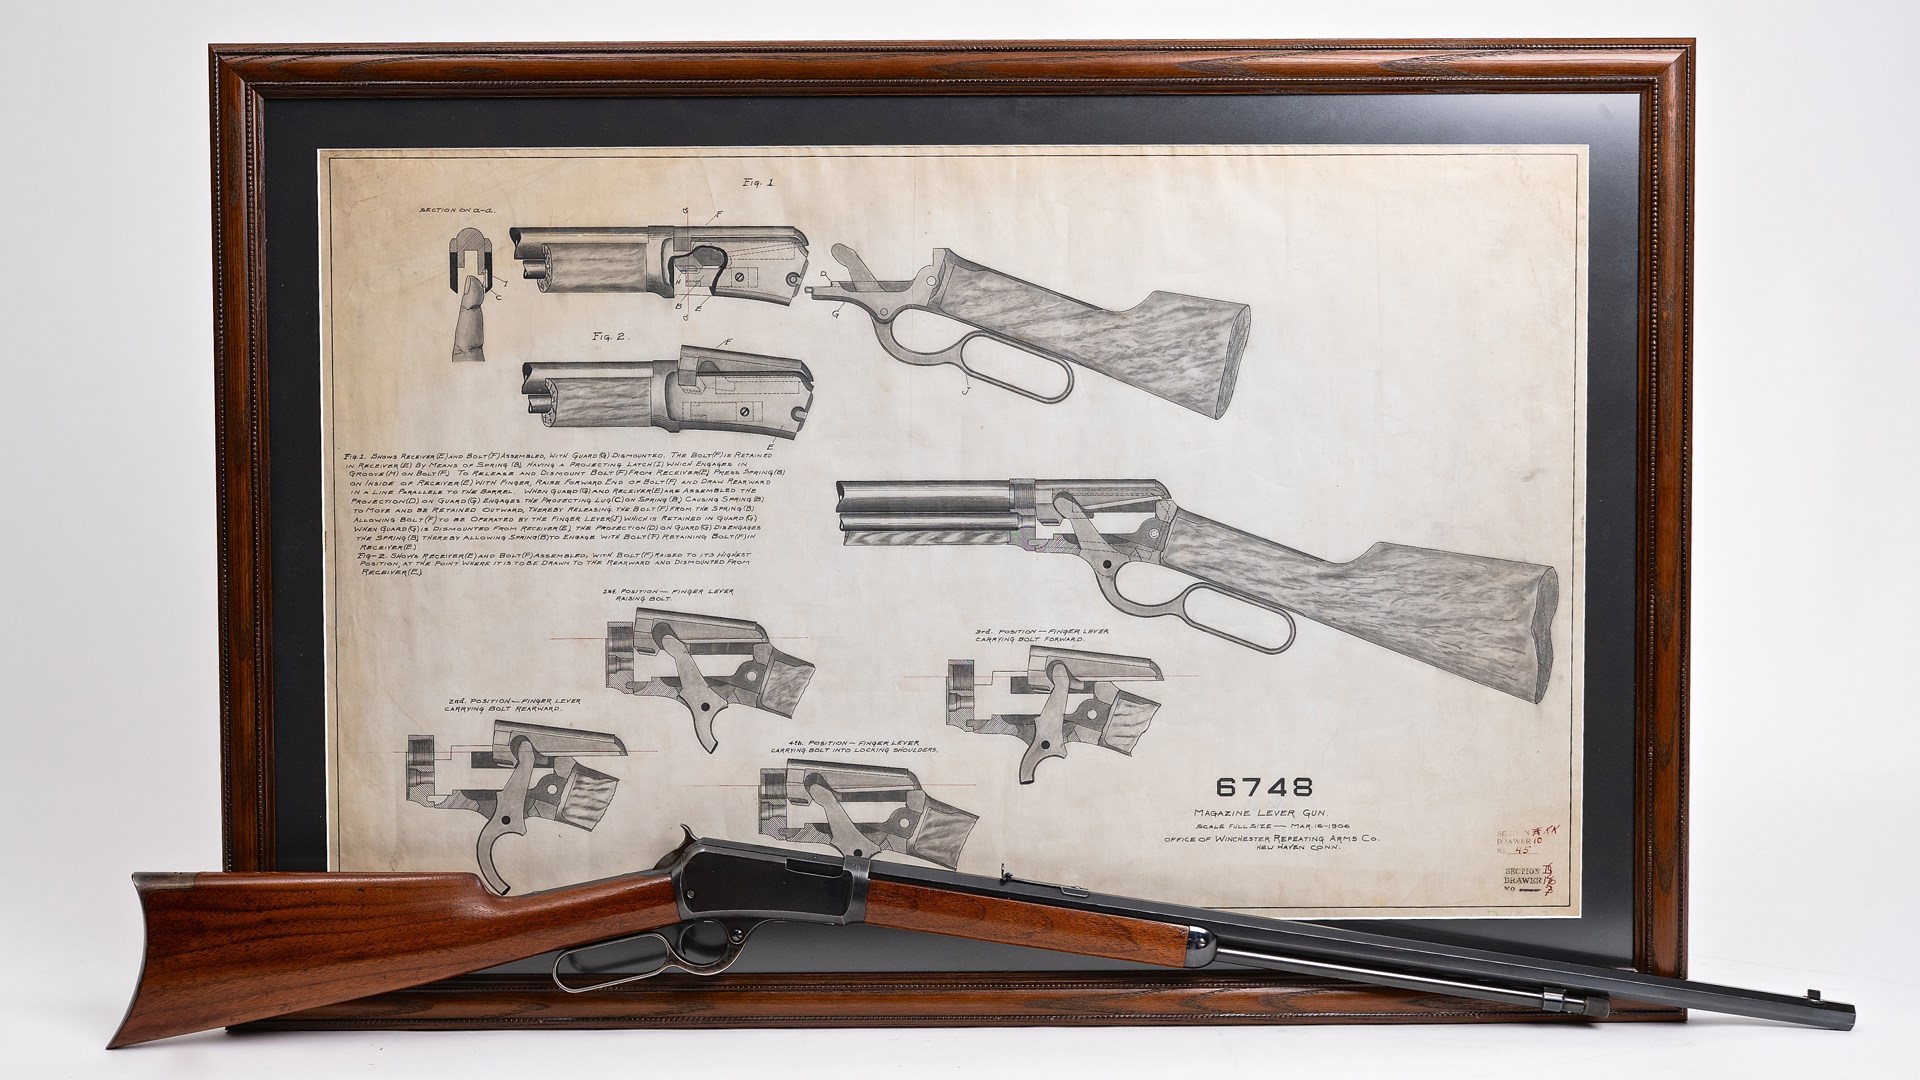 Factory Winchester 1890 Prototype Magazine Lever-Action rifle, .22 WRF & Drawings, Circa 1906 (1) - An ultra-rare and previously unknown Winchester 1890 prototype lever action .22 WRF with patent drawings, circa 1906.